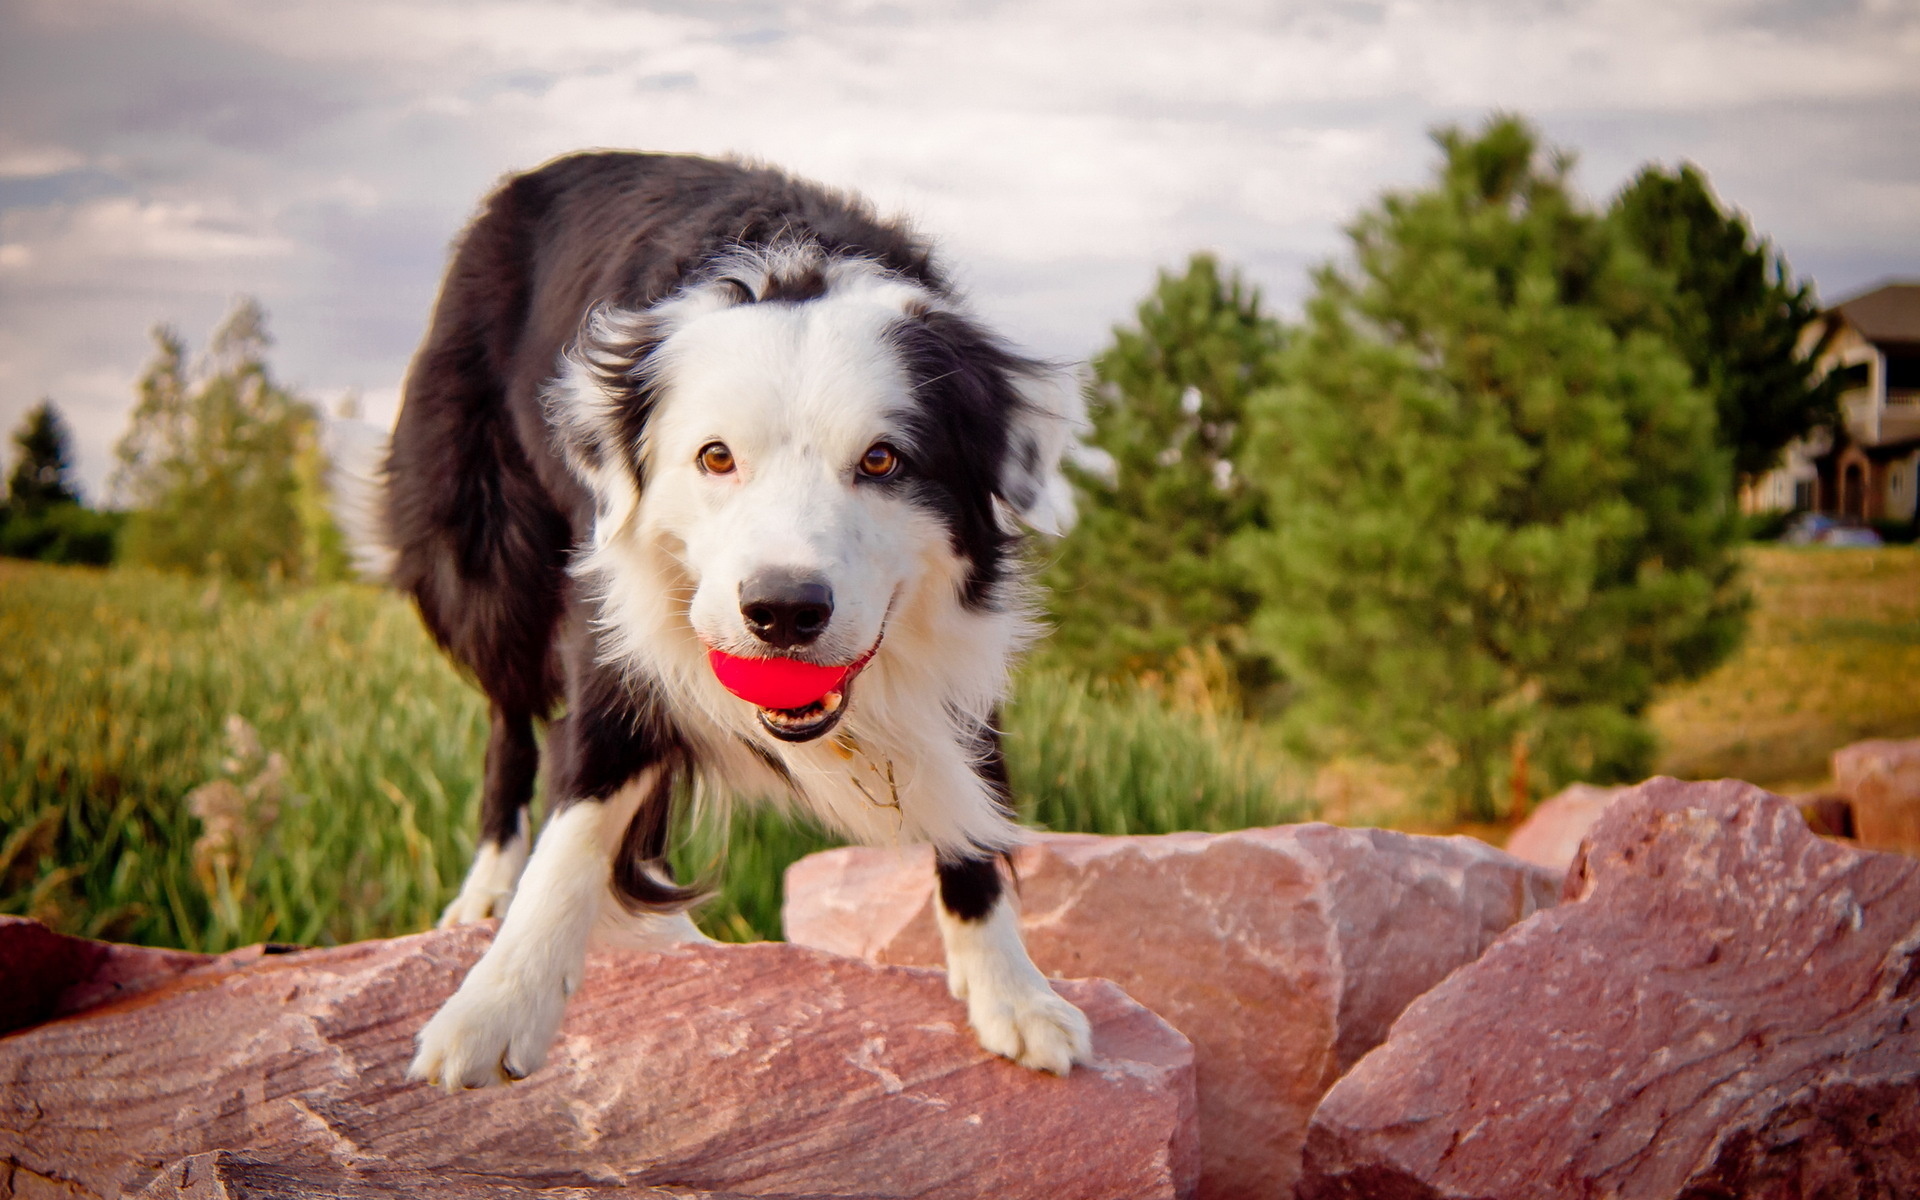 Australian Shepherd with toy in the mouth